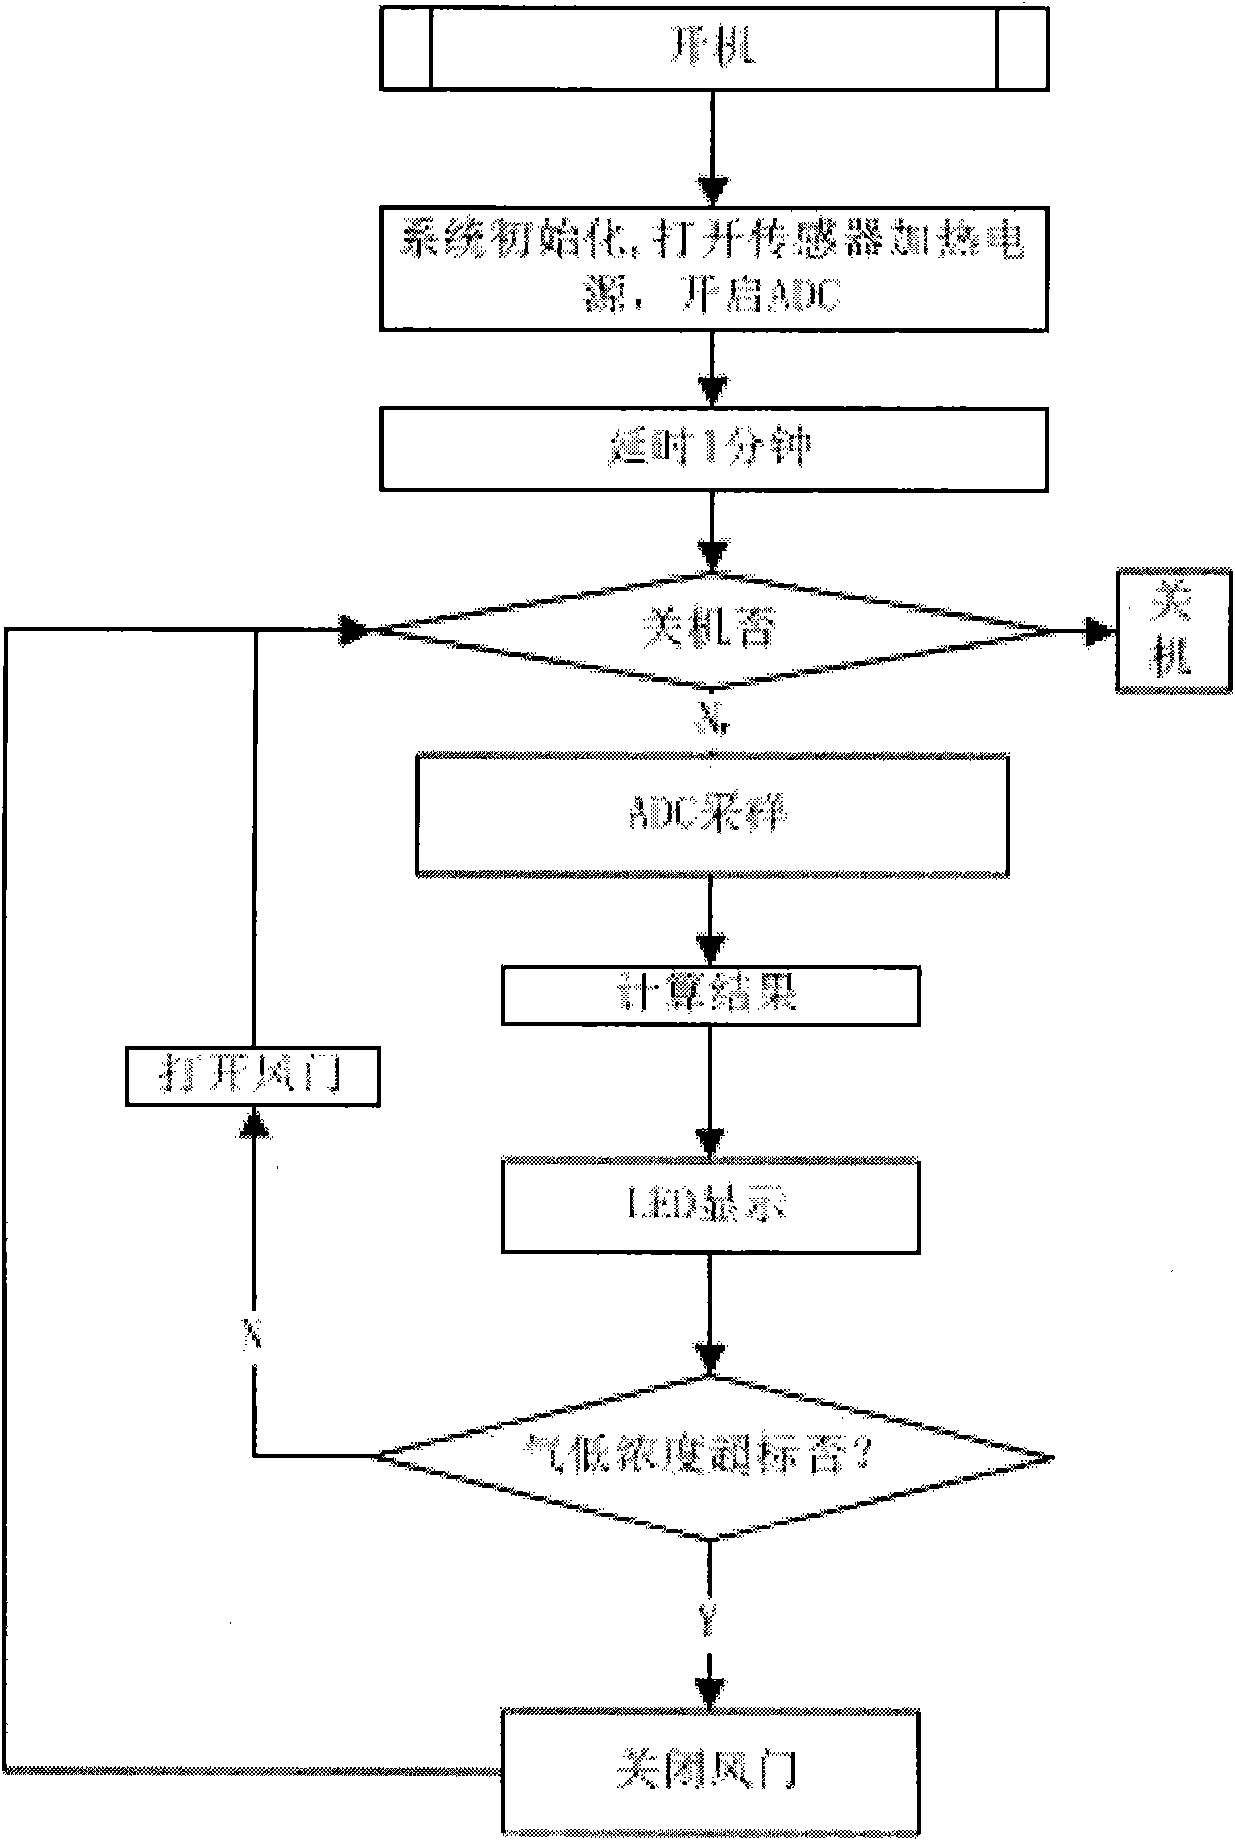 AQS (Air Quality System) implementing method and system applied to automobile afterloading modification